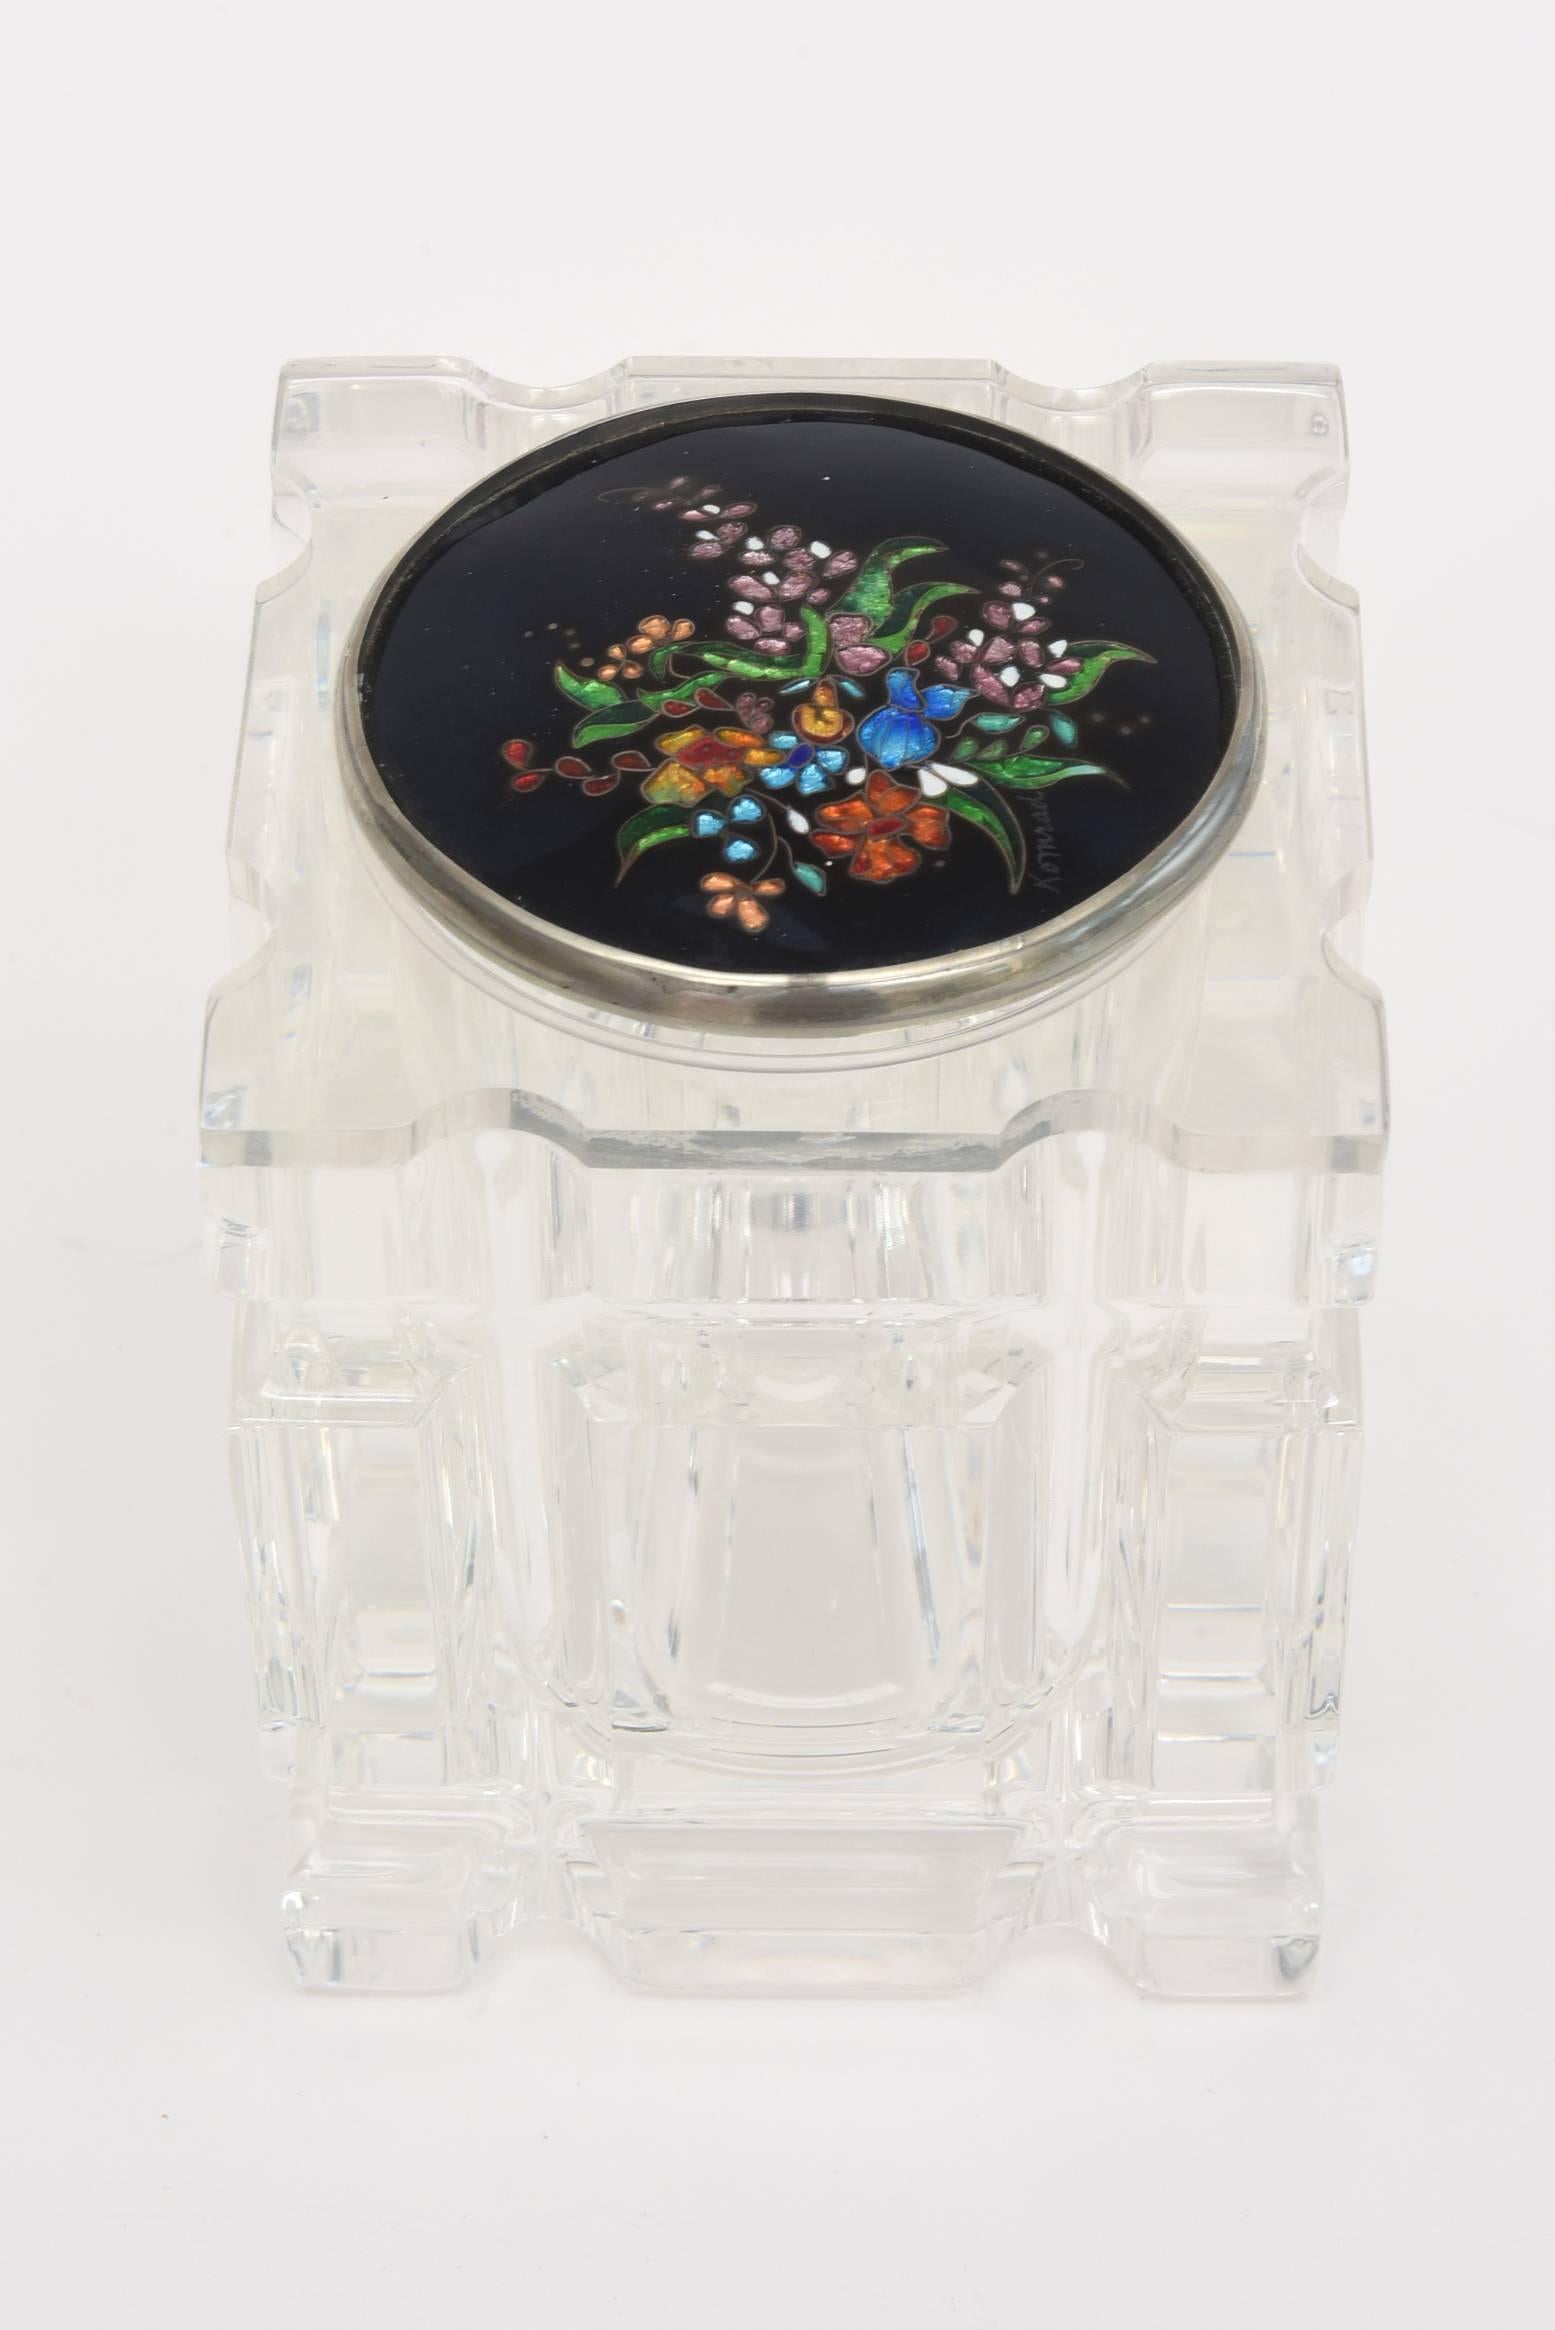 The beautiful detail of this vintage lucite box, vessel or container is the work of artist Komrad as signed on the top. It has gorgeous detail with mixed-media of foiled enameled and cloisonné work on the top that is solely lucite on the bottom. Has